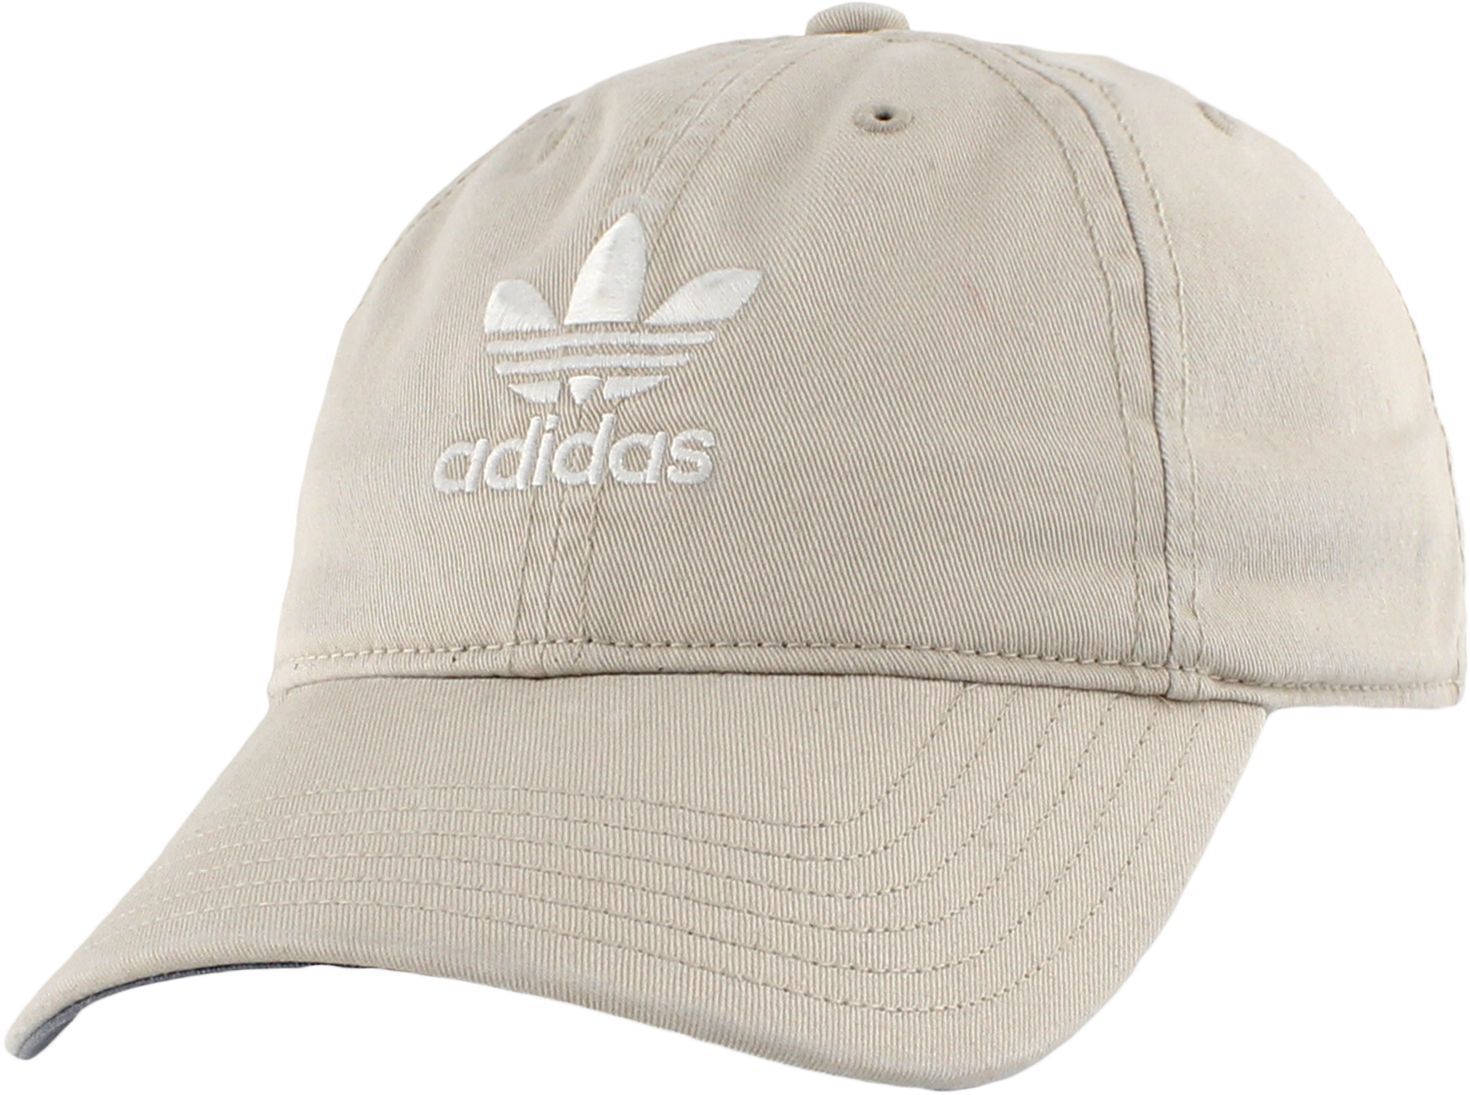 adidas Originals Women's Relaxed Strapback Hat | Dick's Sporting Goods